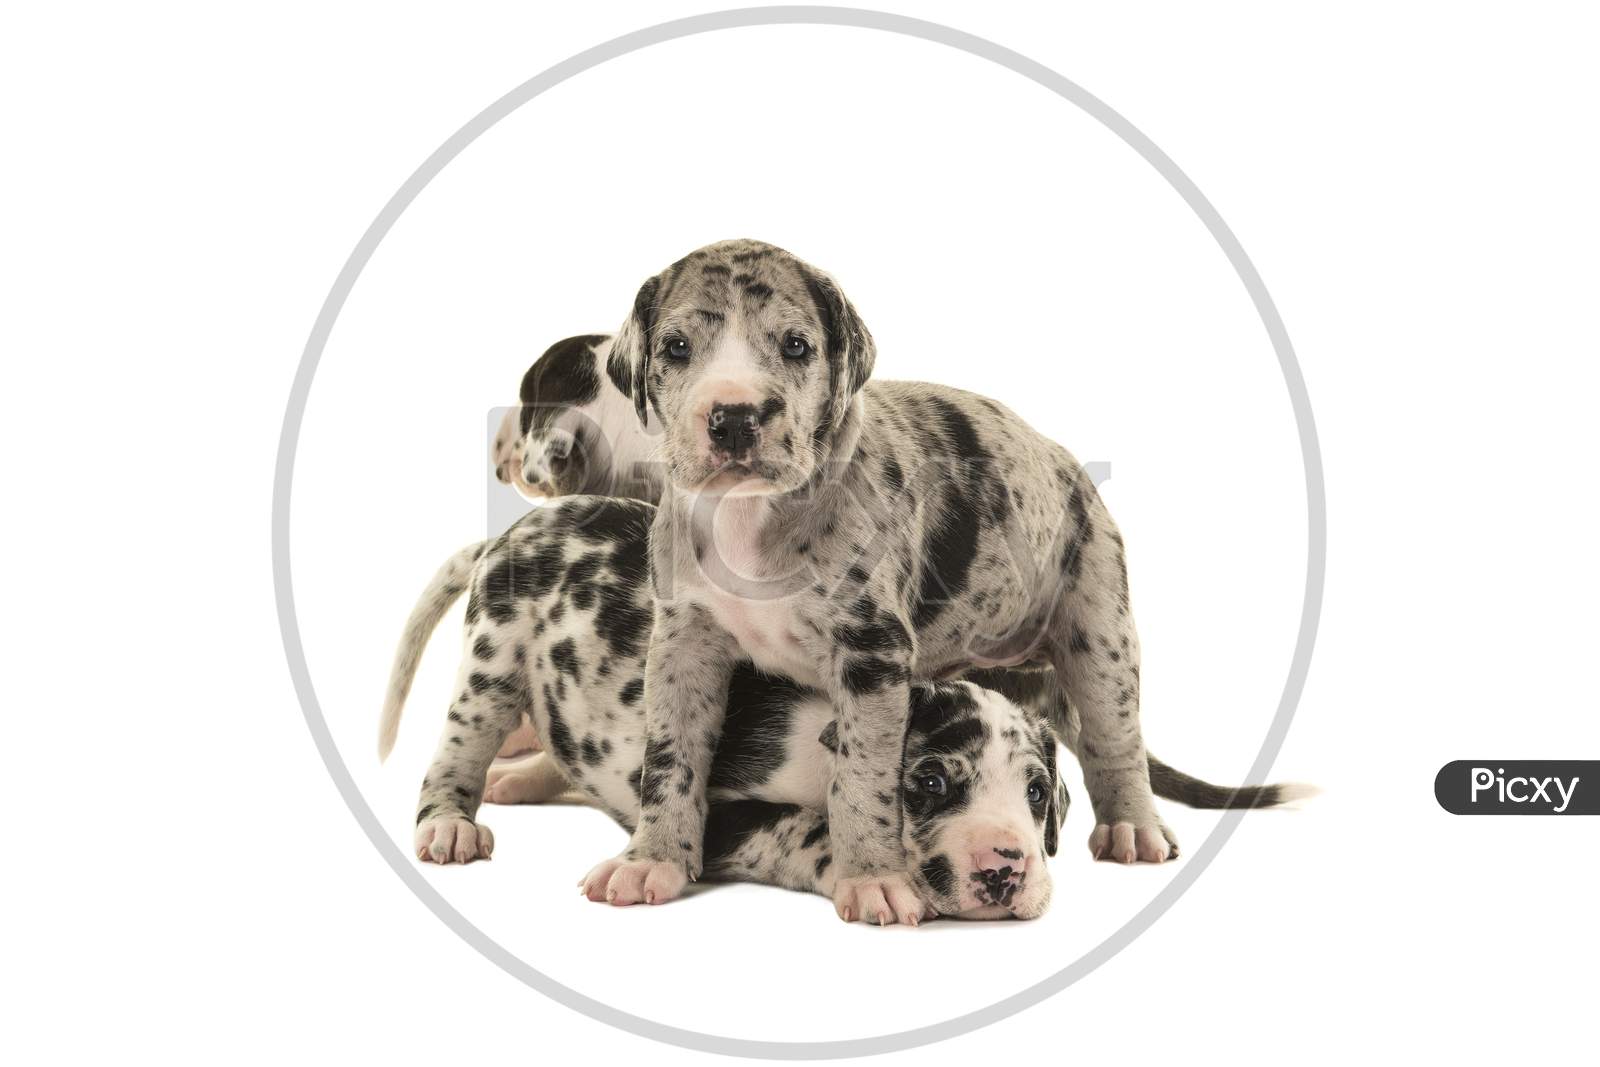 Two Cute Great Dane Puppy Dogs Standing Together Isolated On A White Background